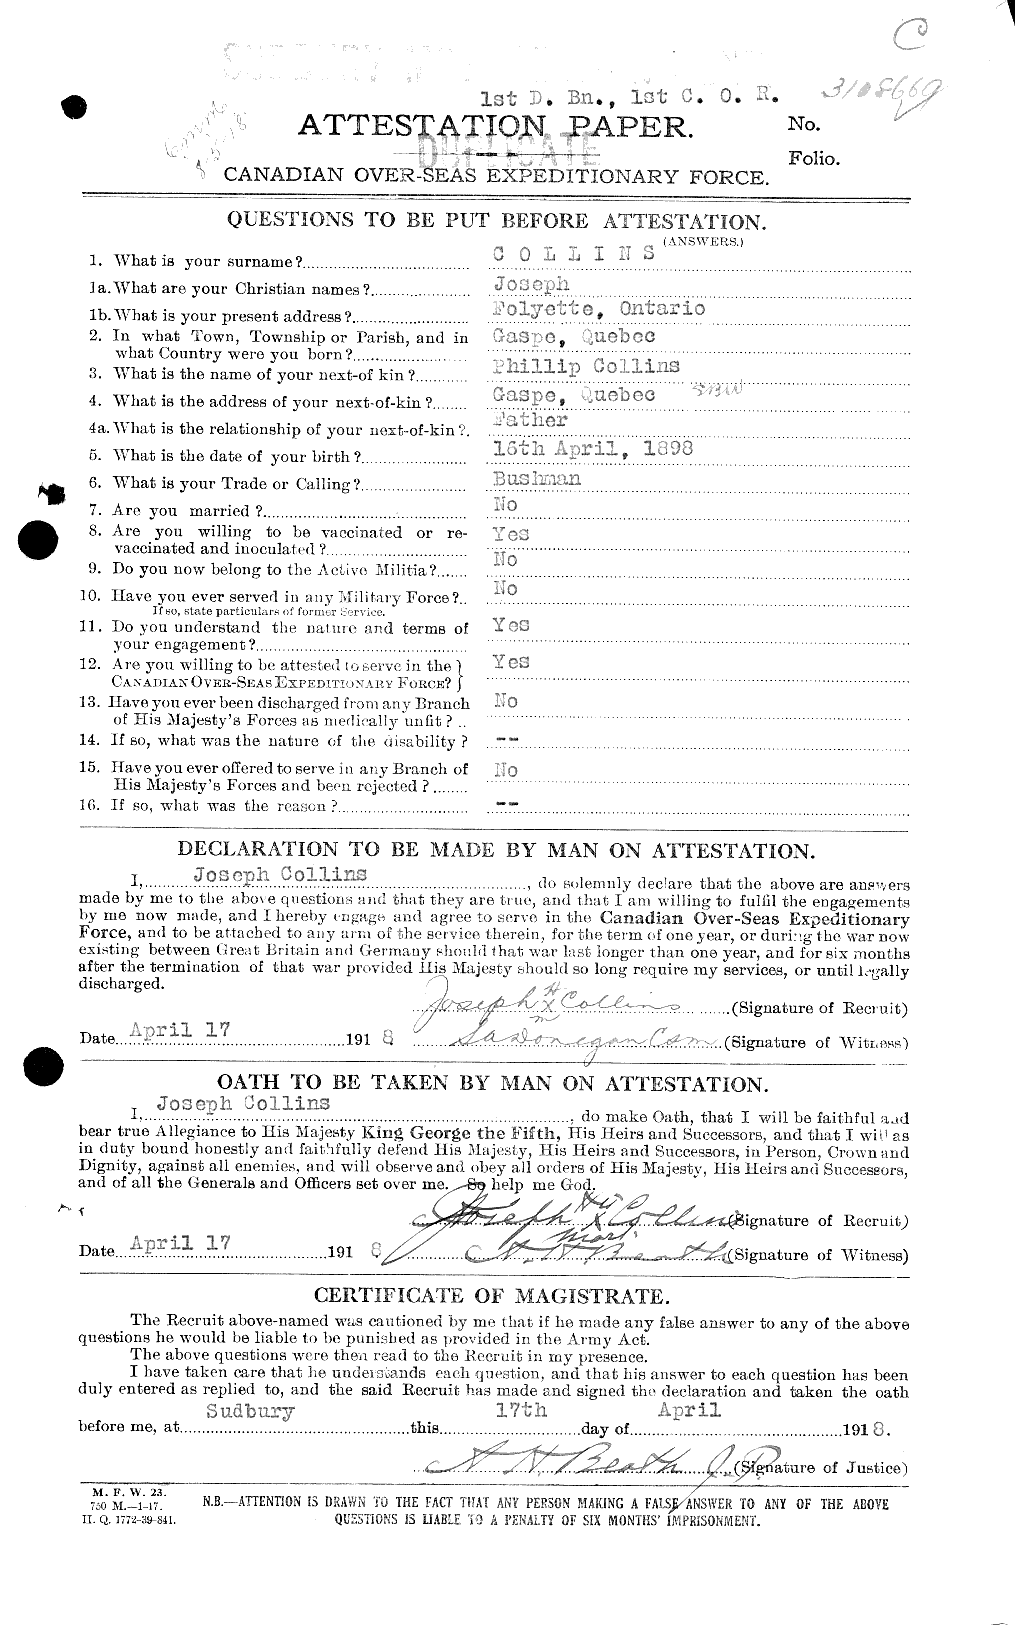 Personnel Records of the First World War - CEF 034409a